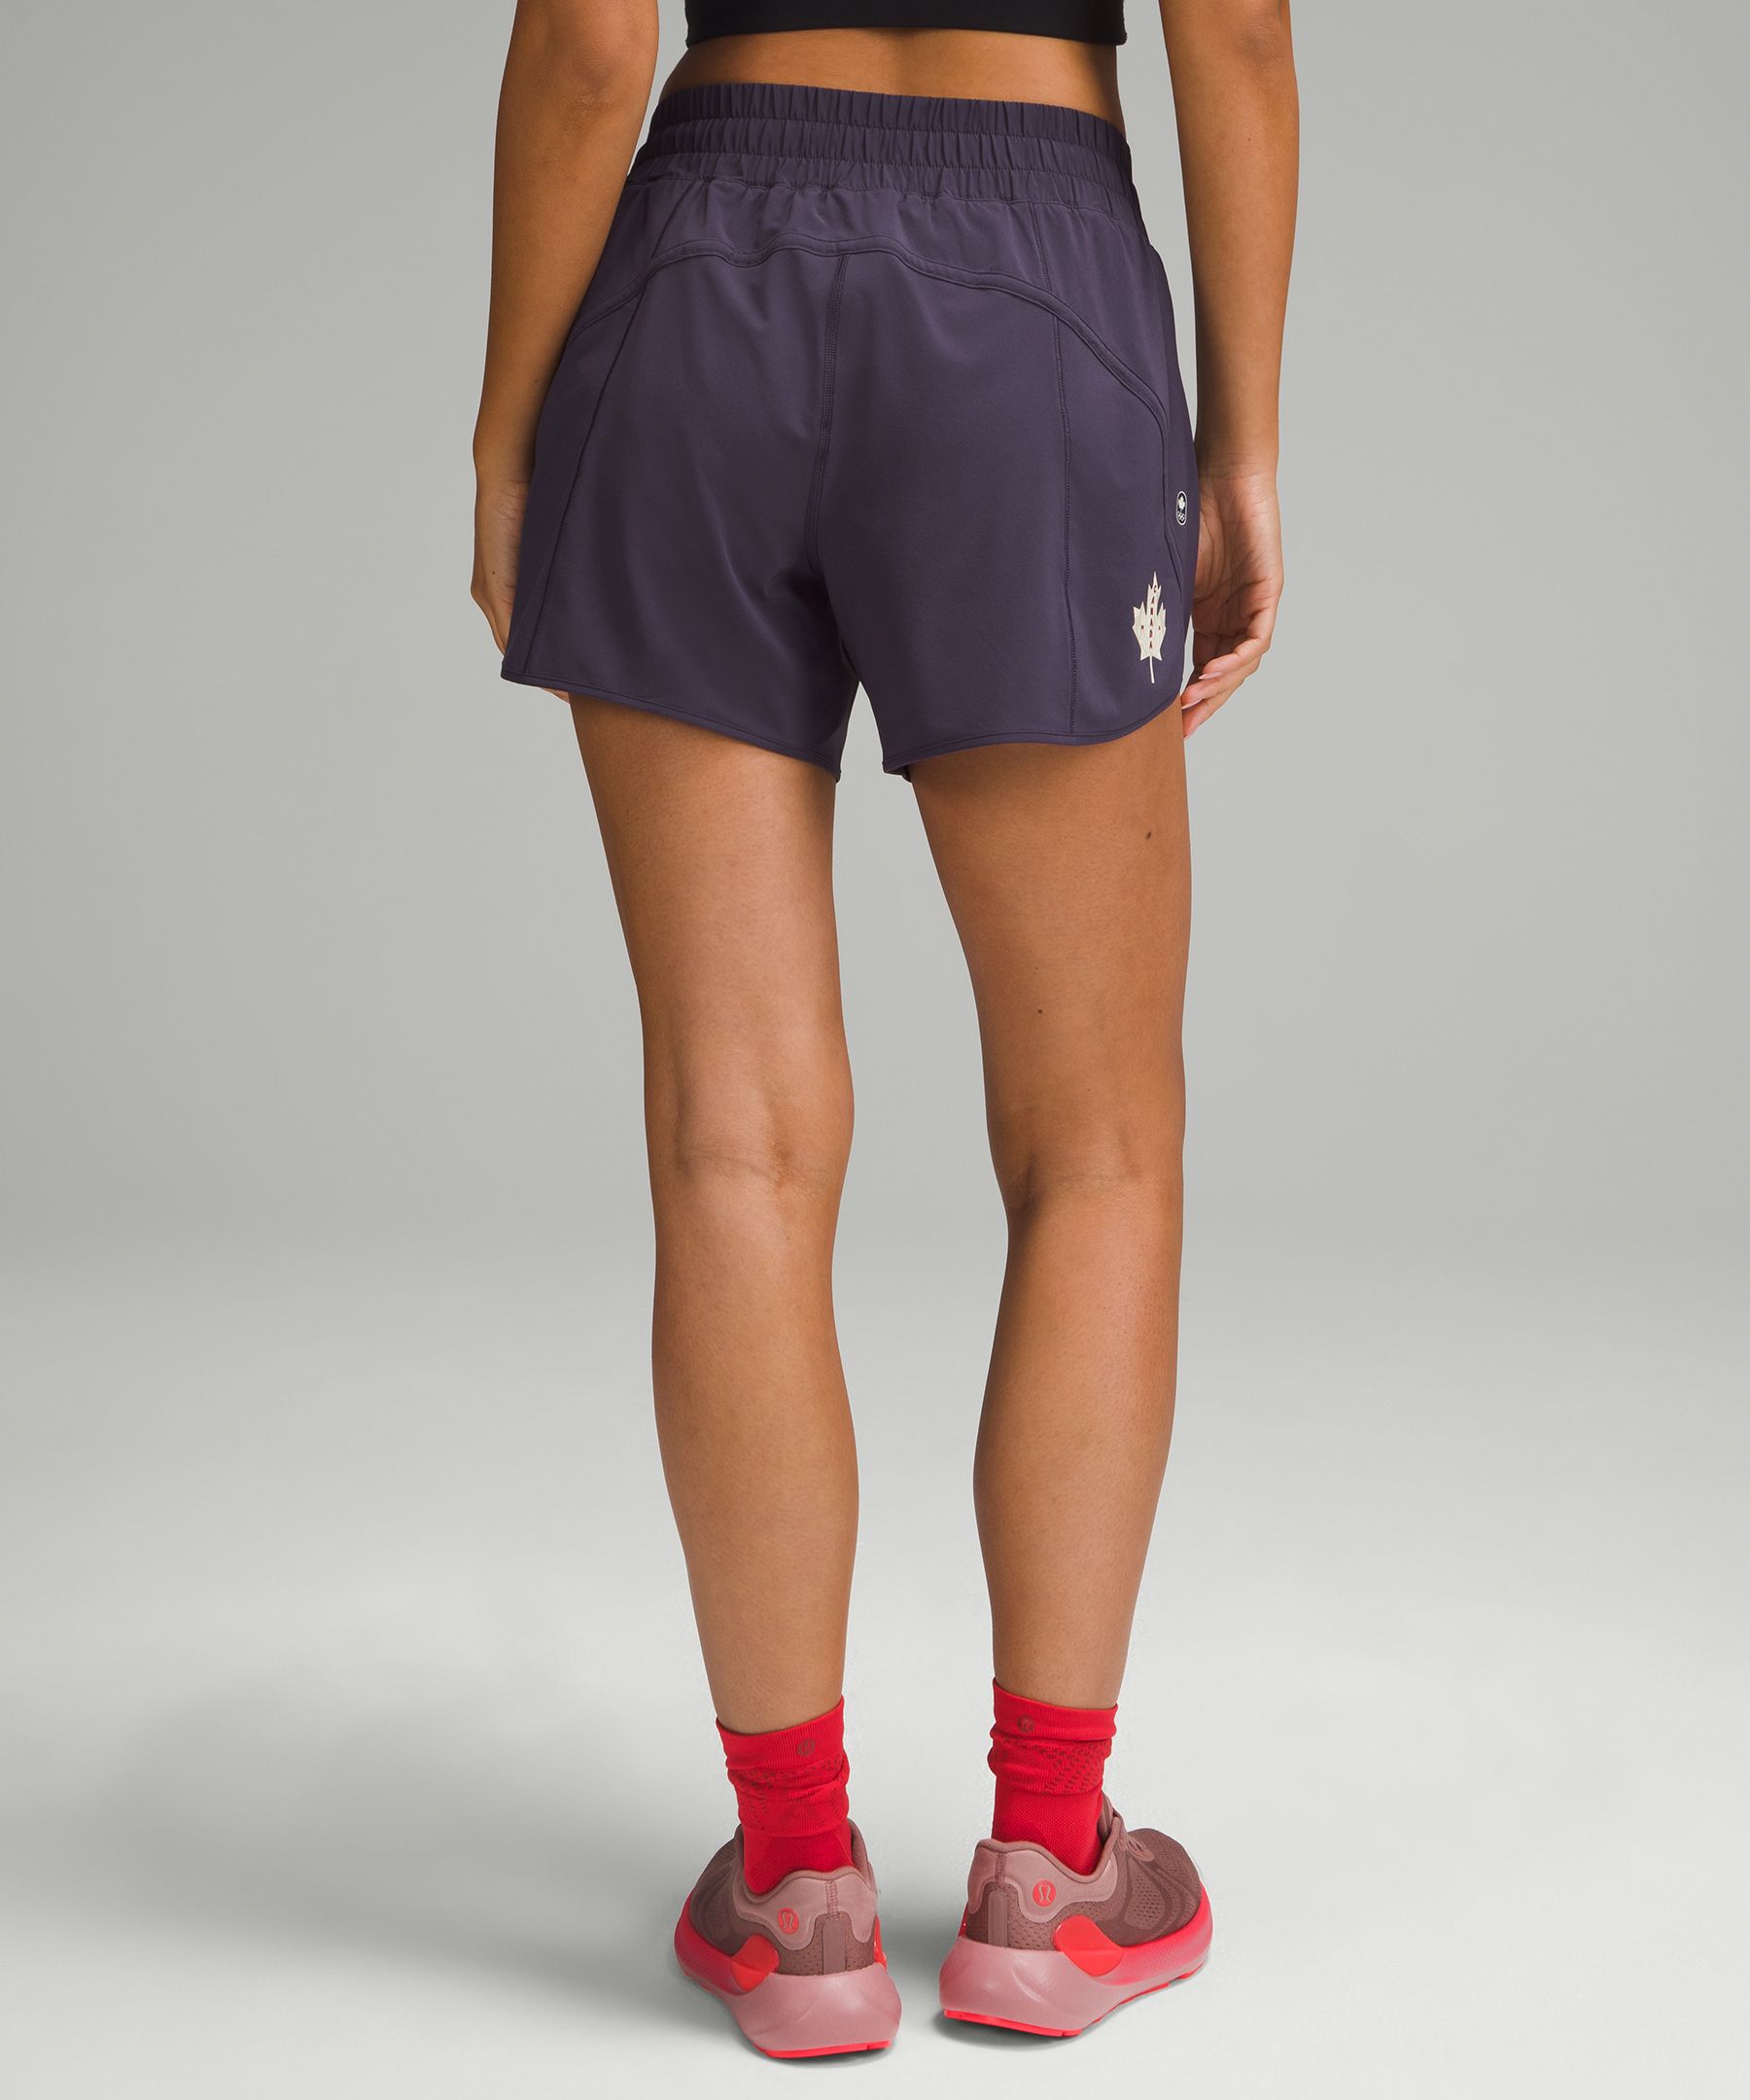 Team Canada Track That Mid-Rise Lined Short 5" *COC Logo | Women's Shorts